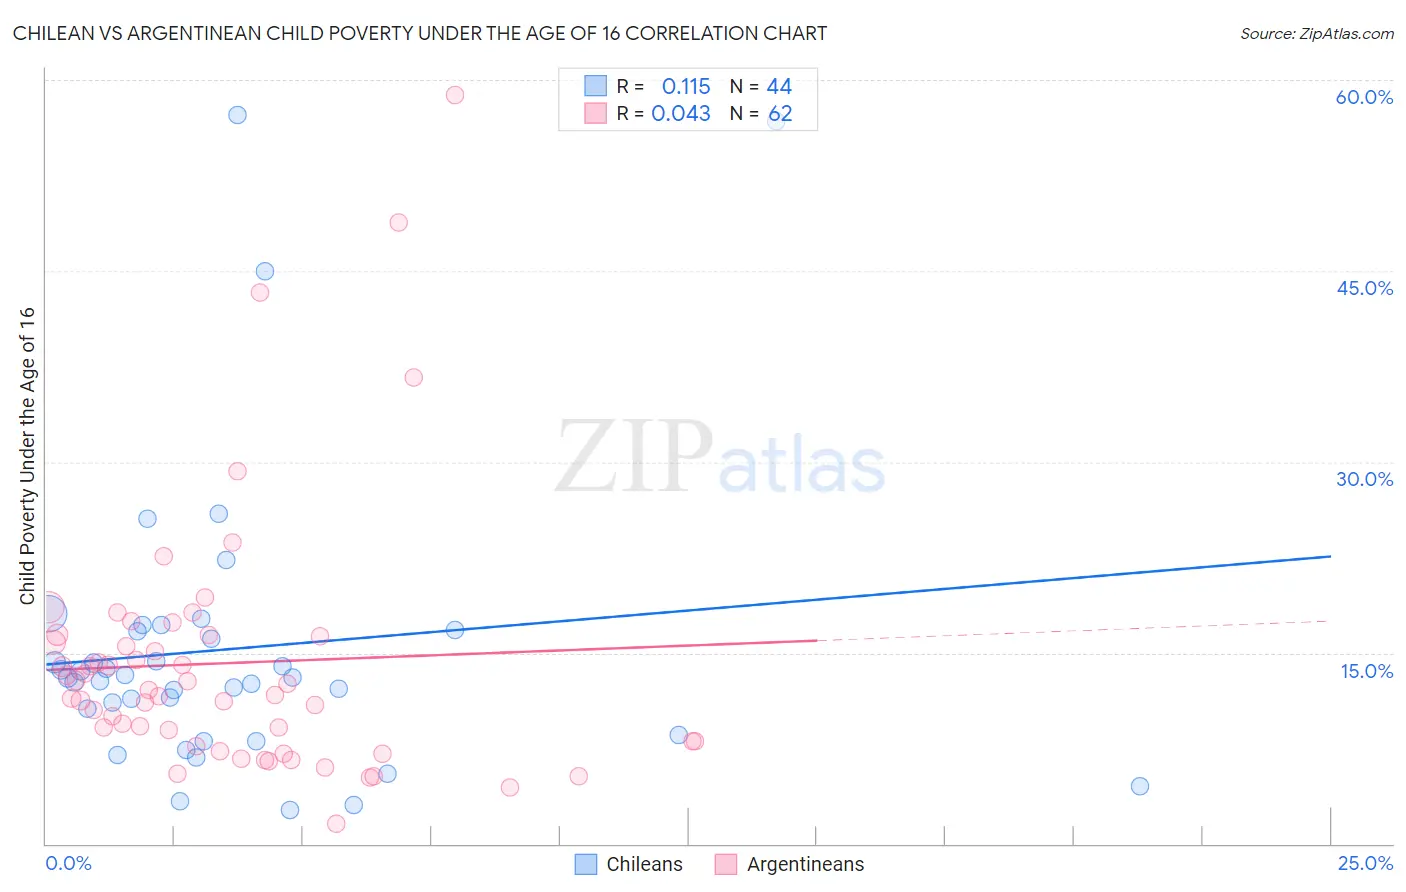 Chilean vs Argentinean Child Poverty Under the Age of 16